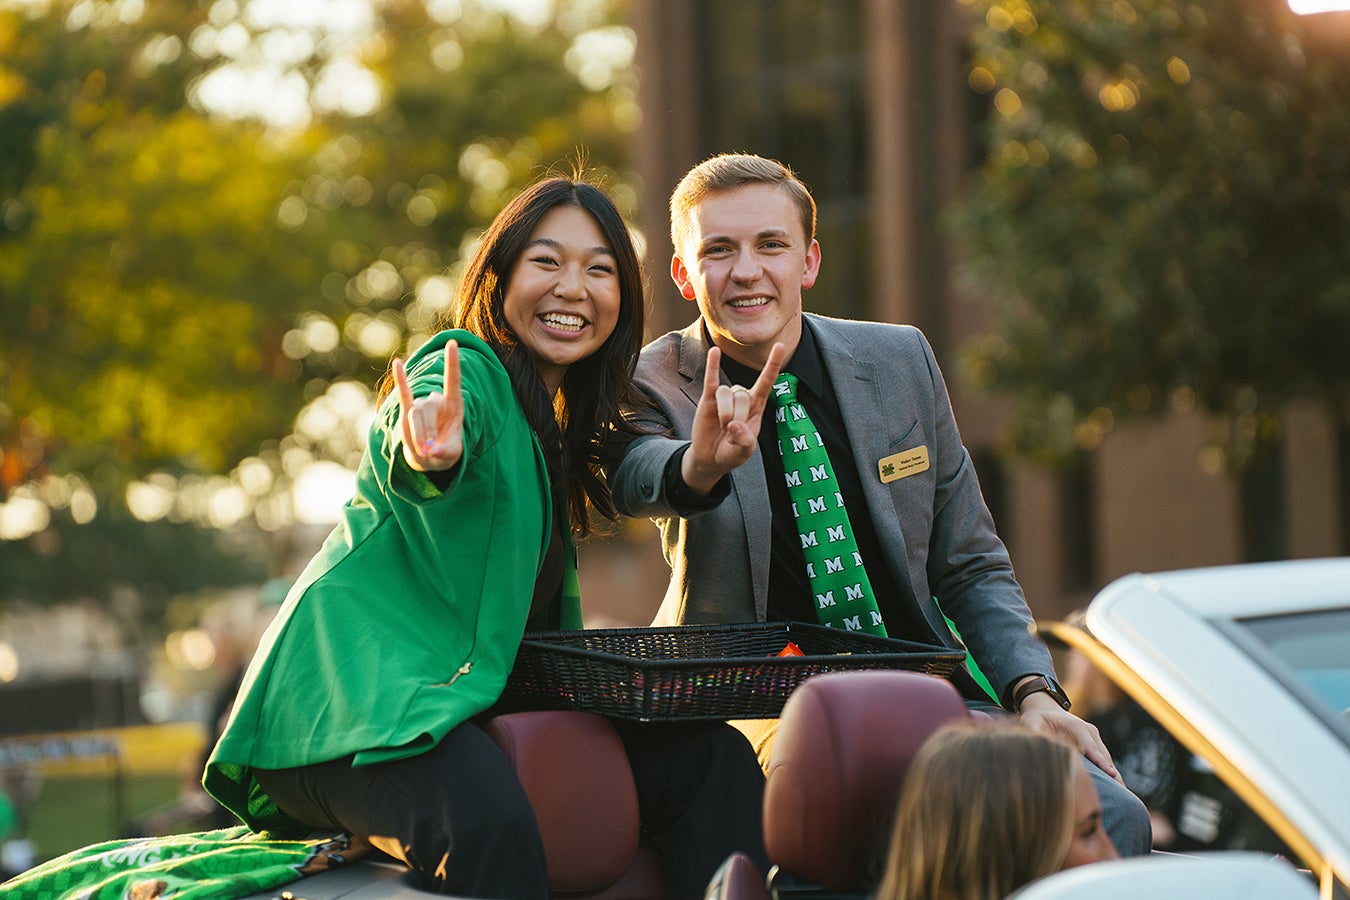 Students participate in Marshall University's annual homecoming parade